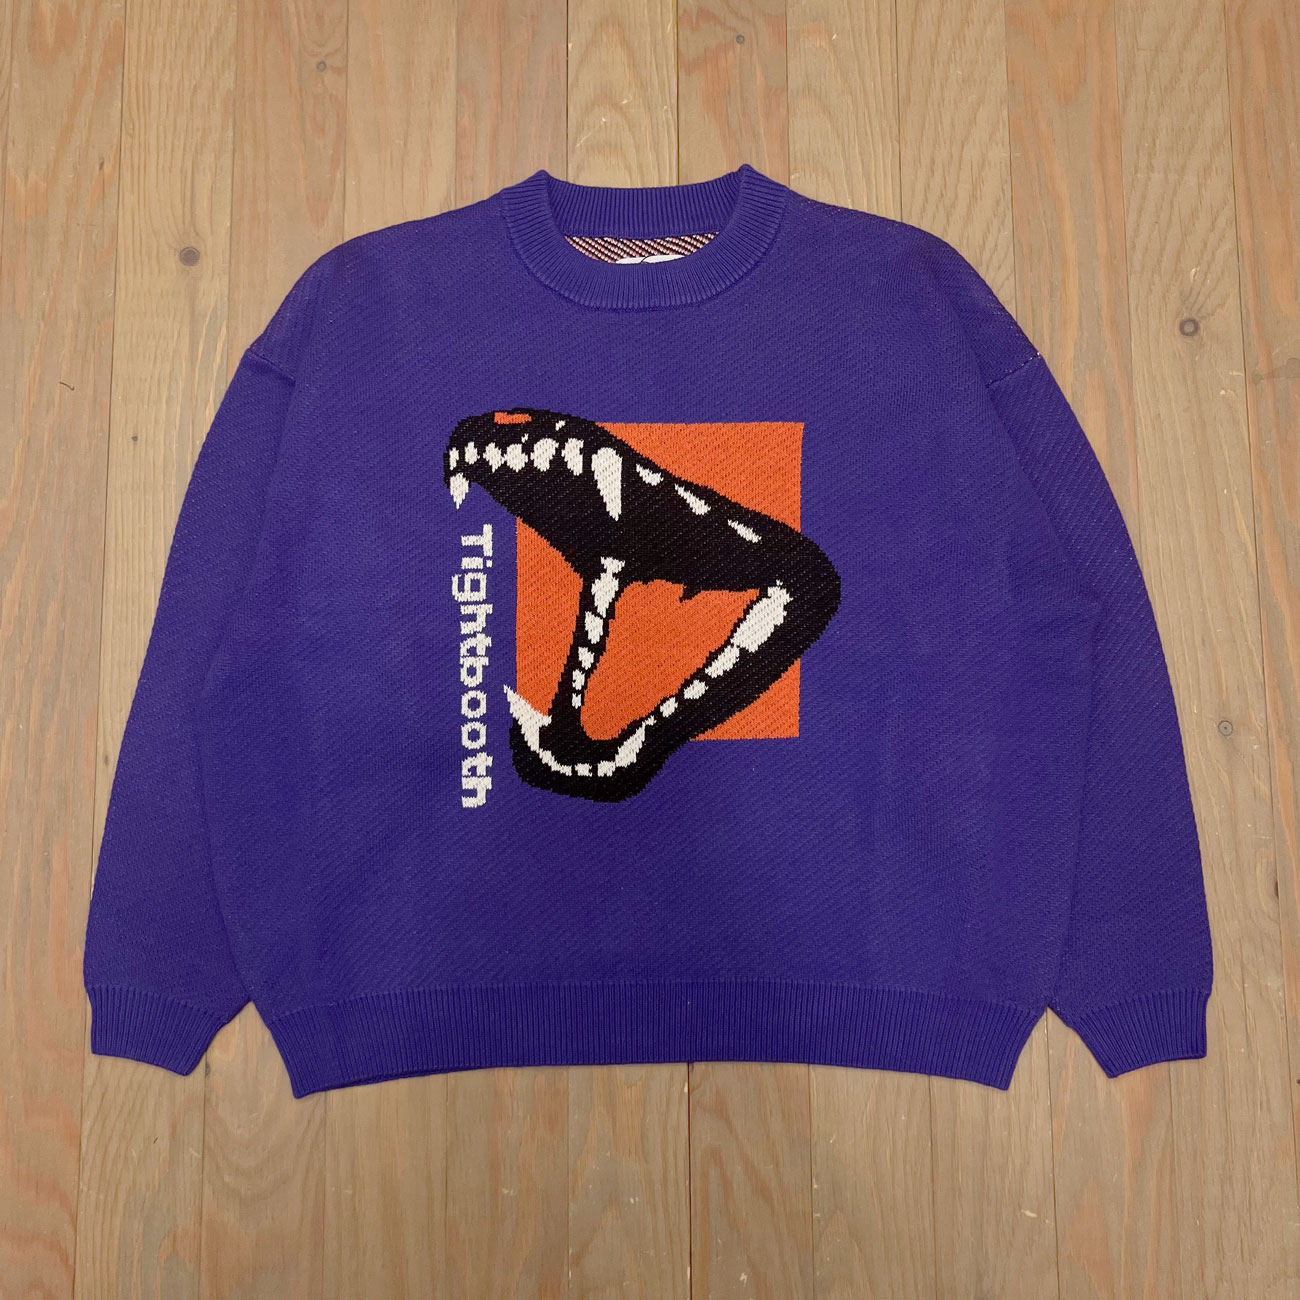 TIGHTBOOTH BITE KNIT SWEATER